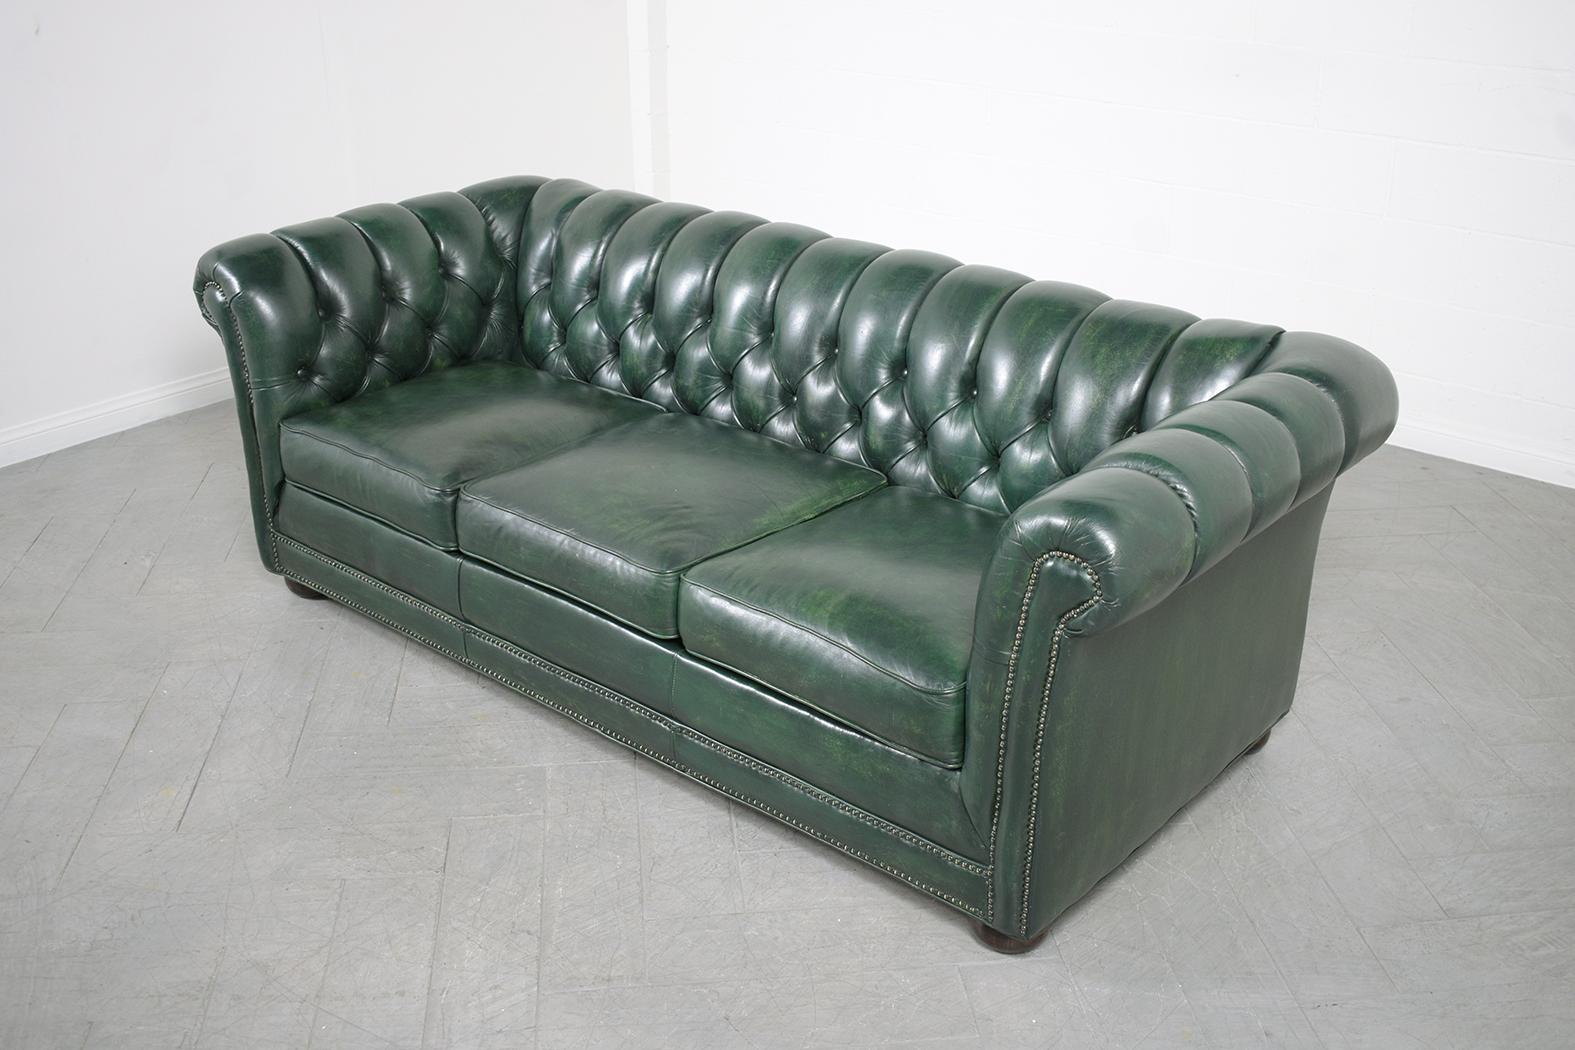 Vintage Chesterfield Leather Sofa 3